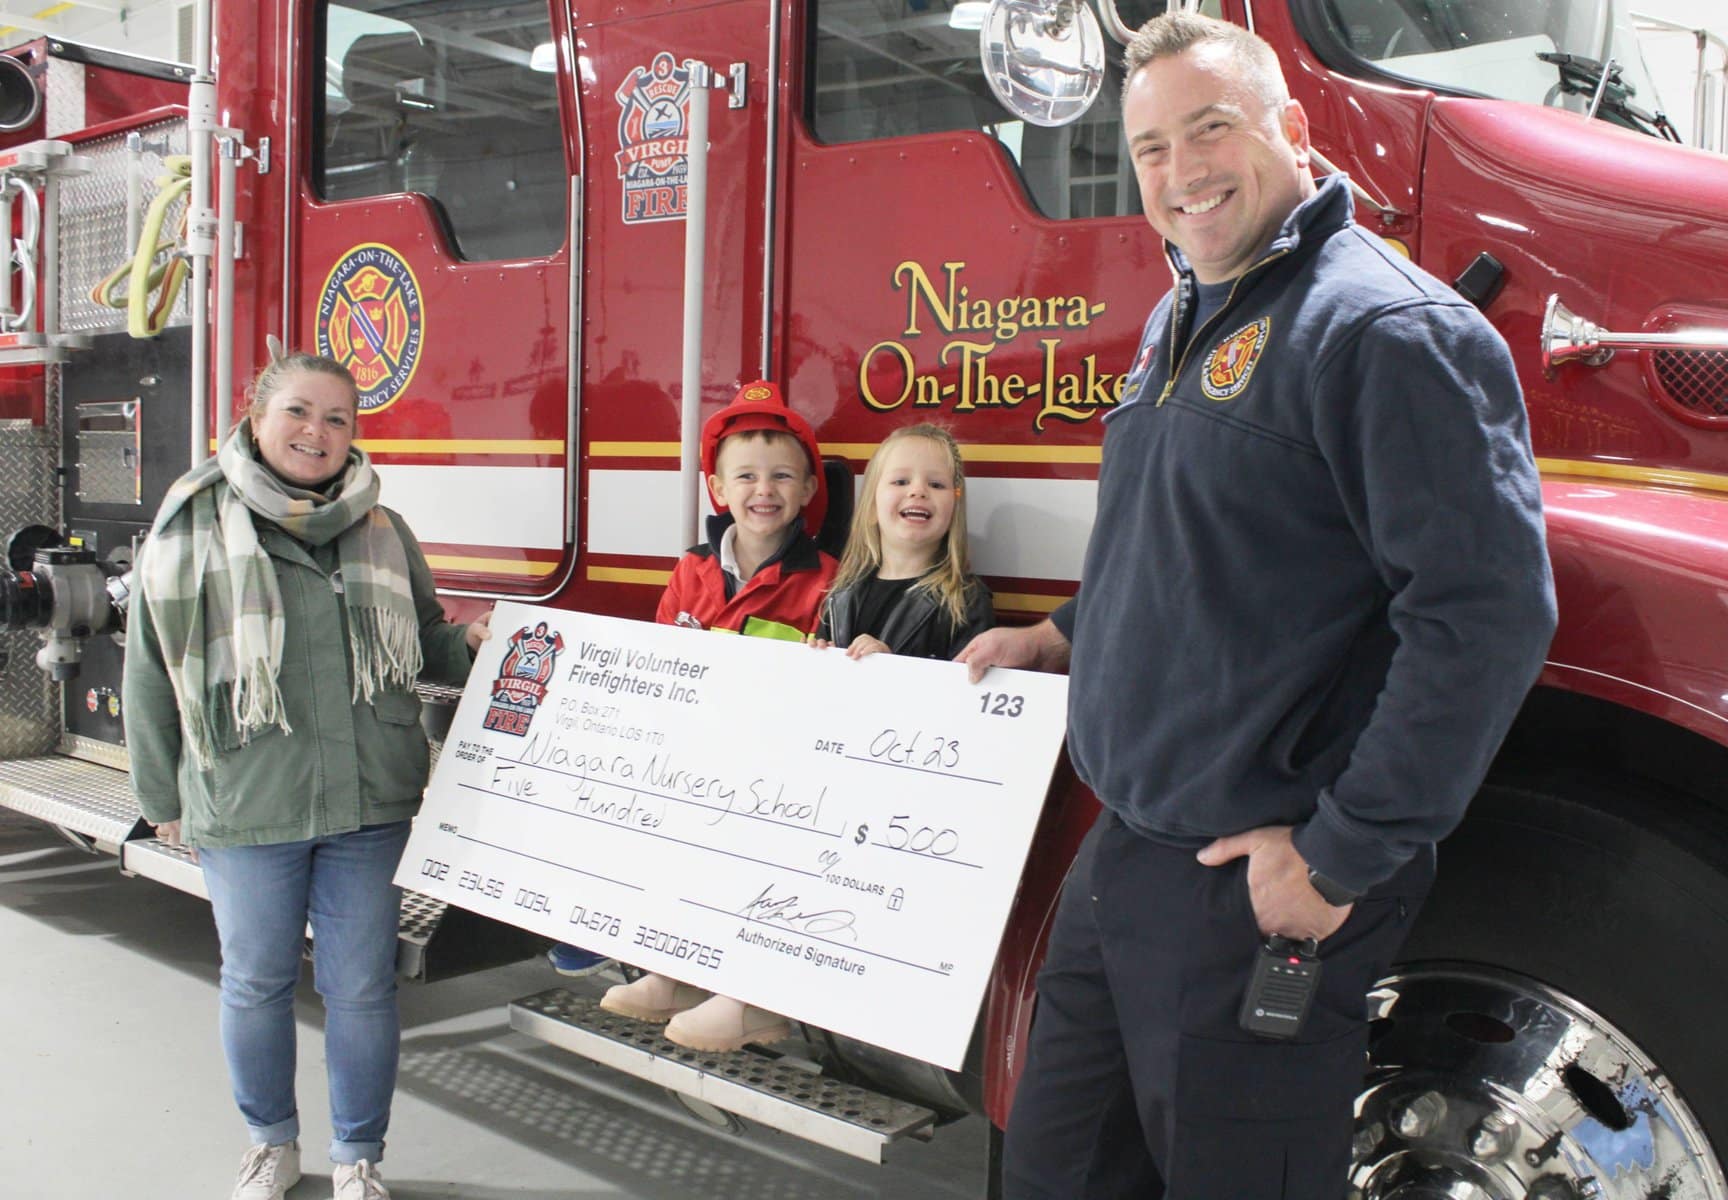 The Virgil Volunteer Firefighters Association donated $500 to the Niagara Nursery School. The money was a part of the proceeds from the association's Classic. Car Show held in August.